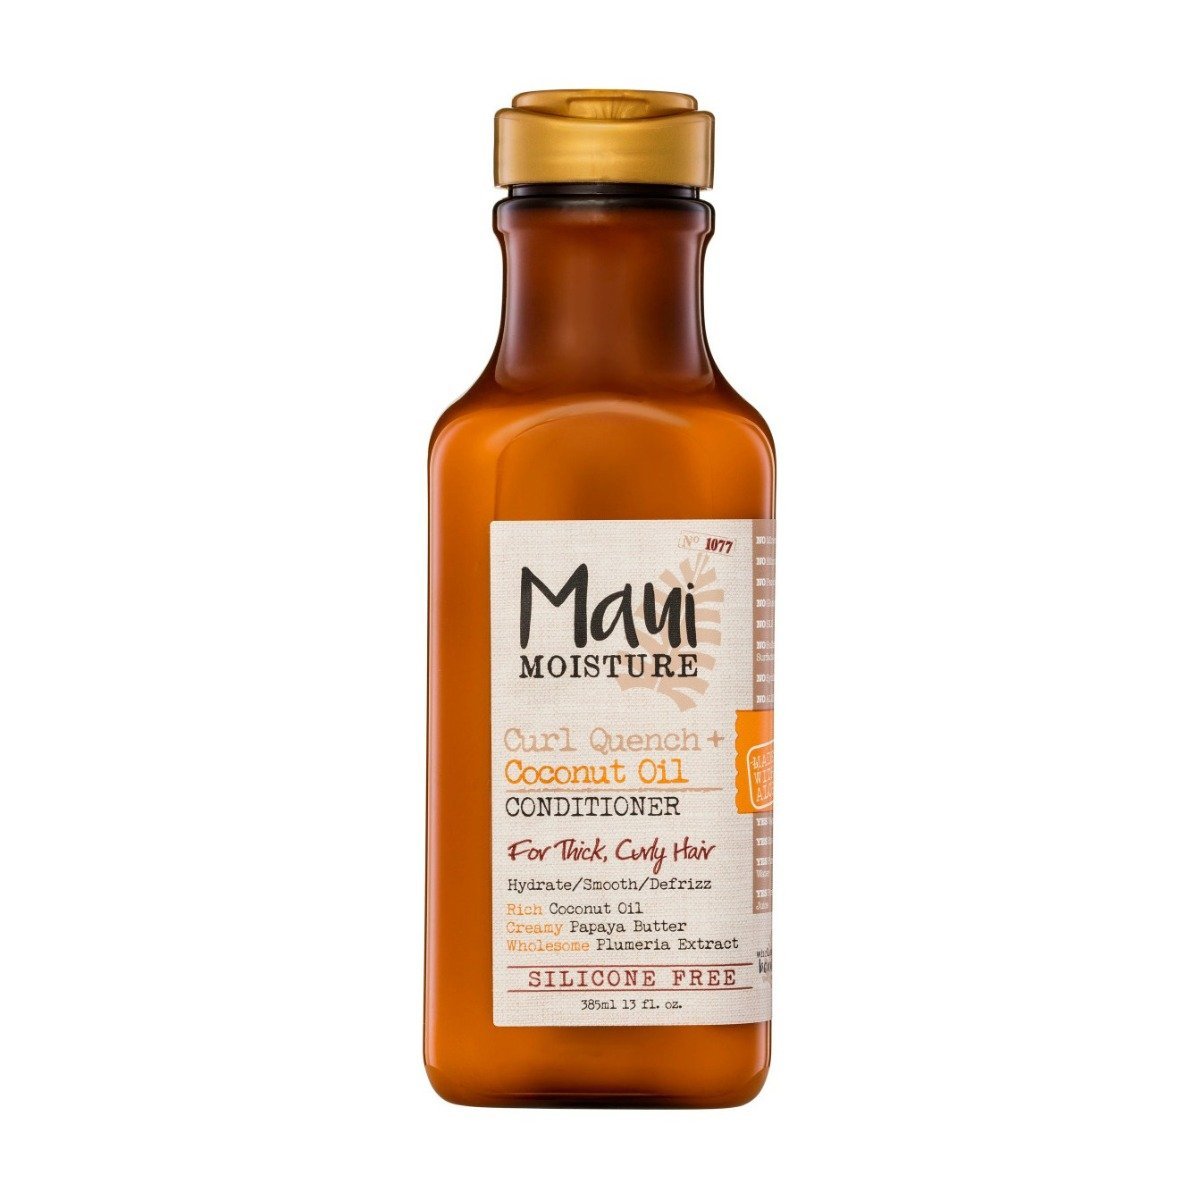 Maui Moisture Curl Quench + Coconut Oil Conditioner for Thick Curly Hair - 385ml - Bloom Pharmacy